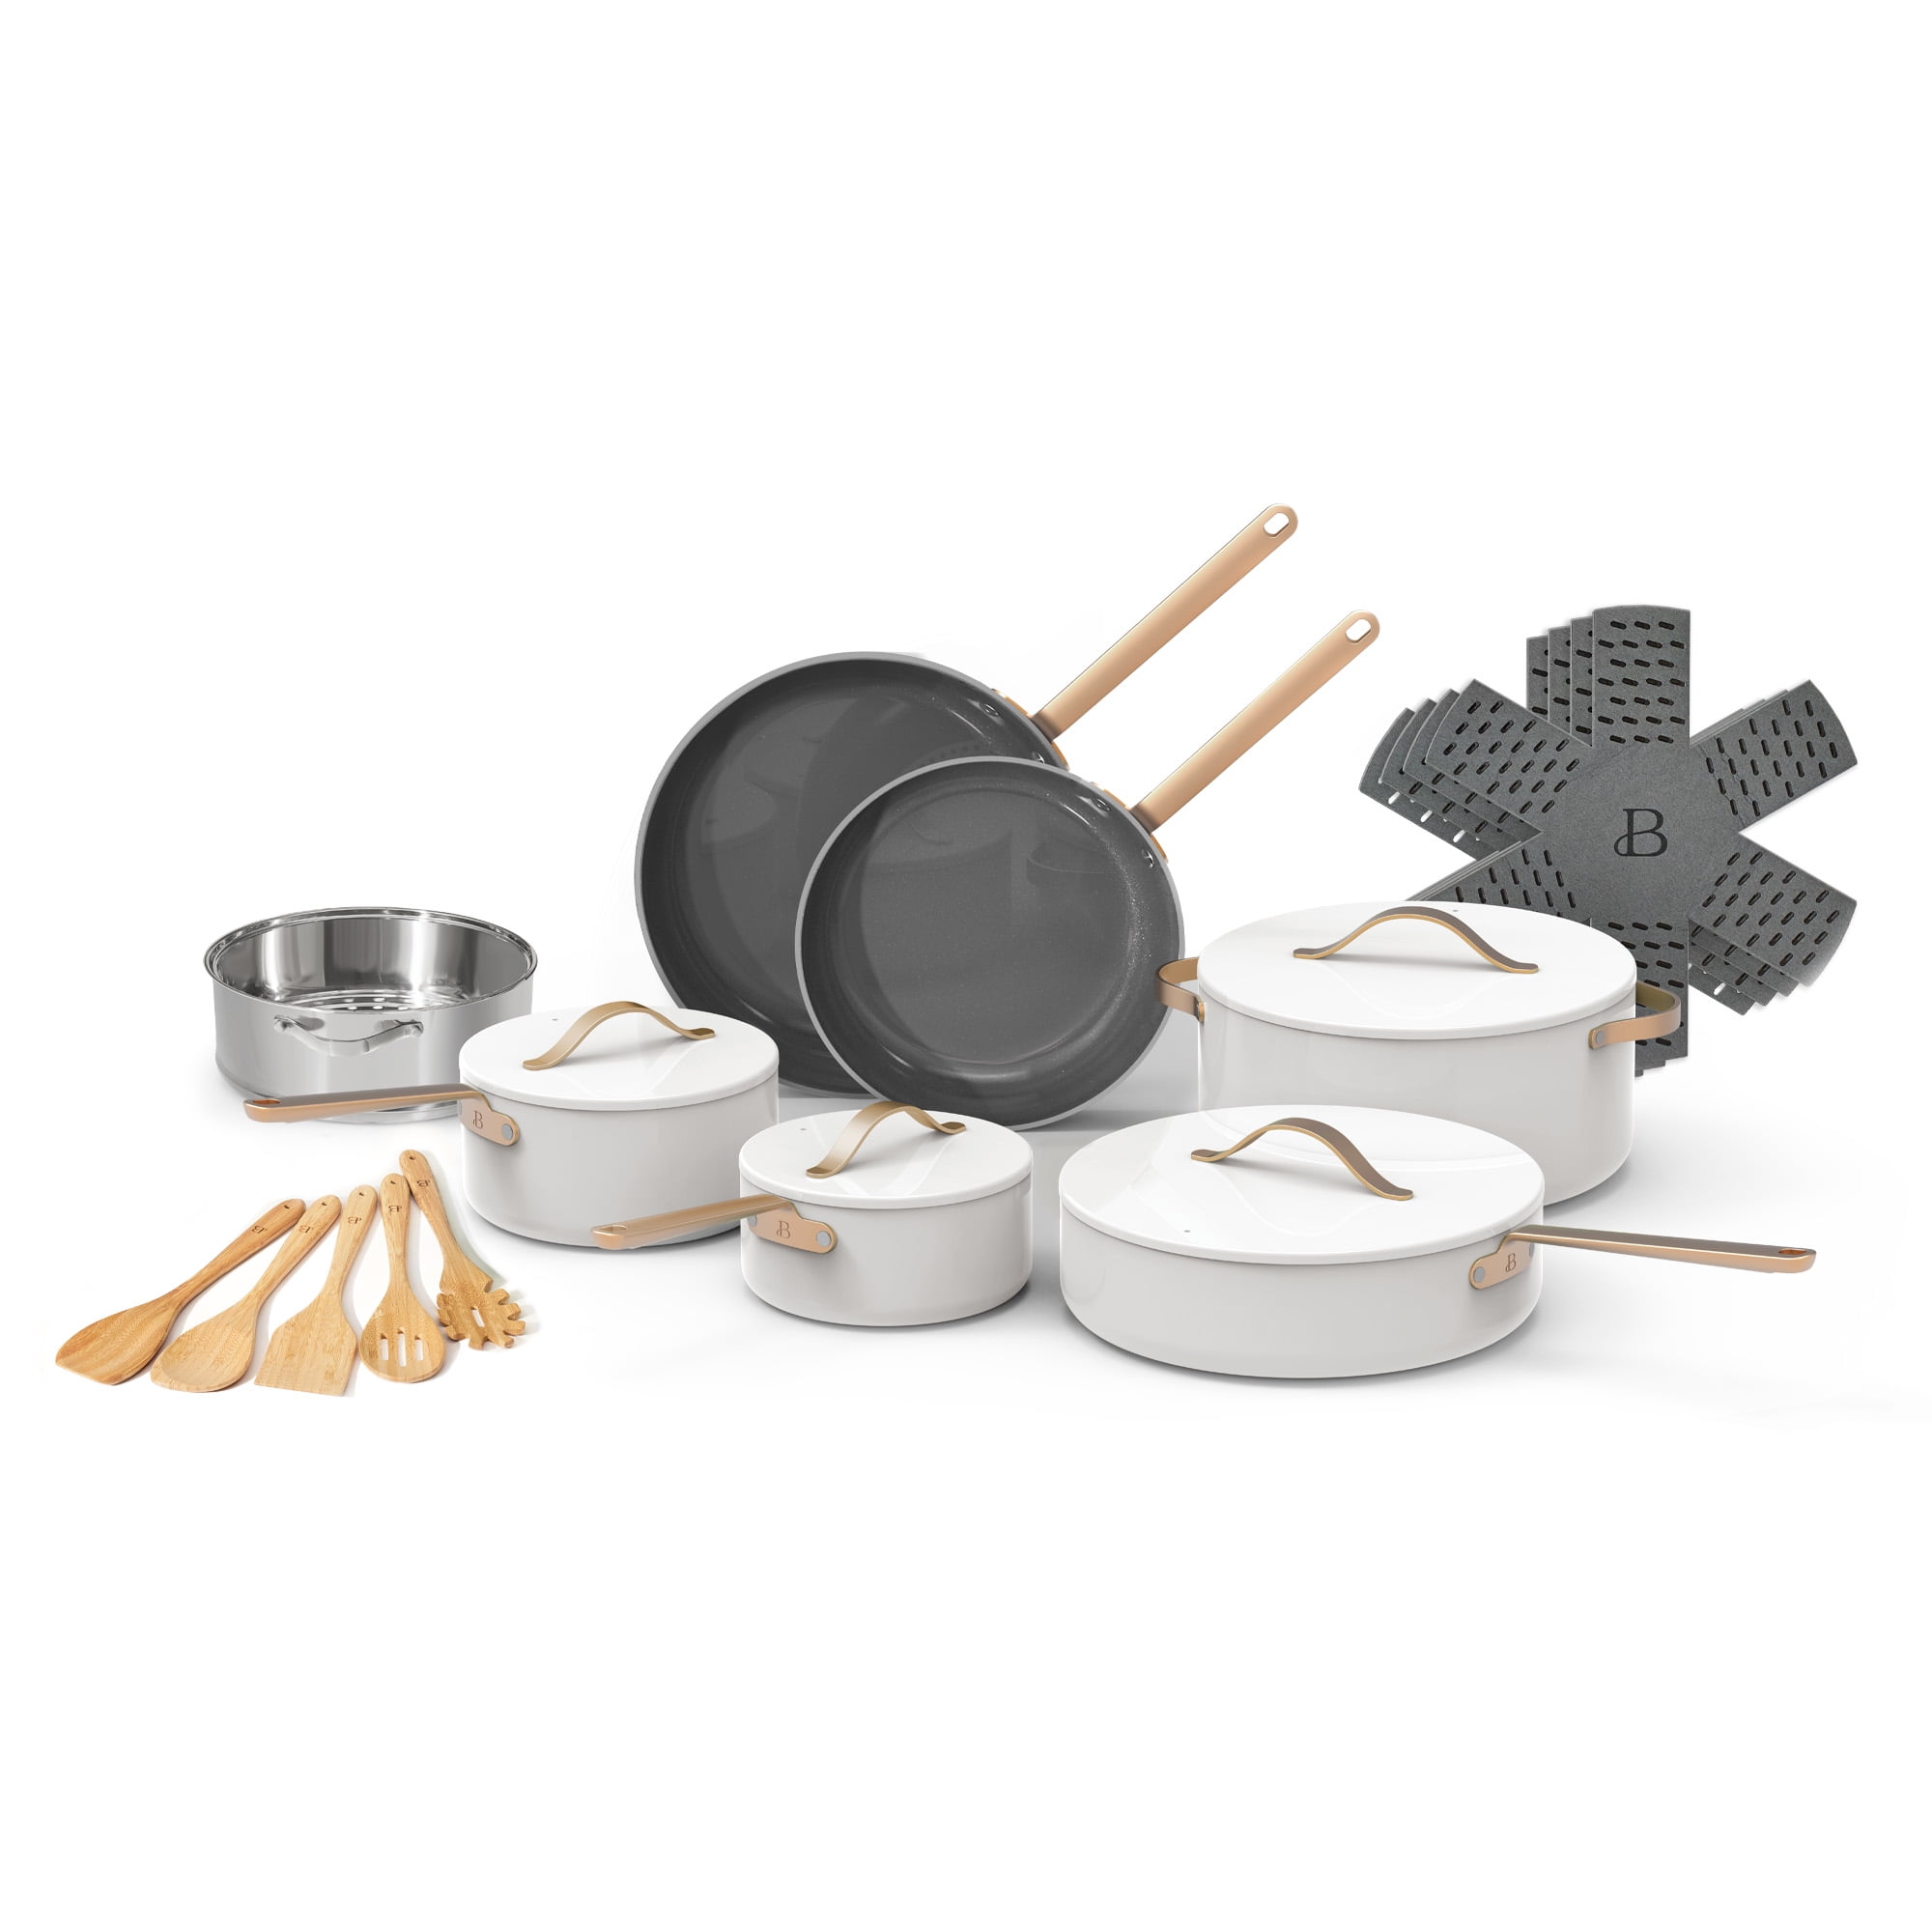 Beautiful 20pc Ceramic Non-Stick Cookware Set, White Icing, by Drew Barrymore - Walmart.com